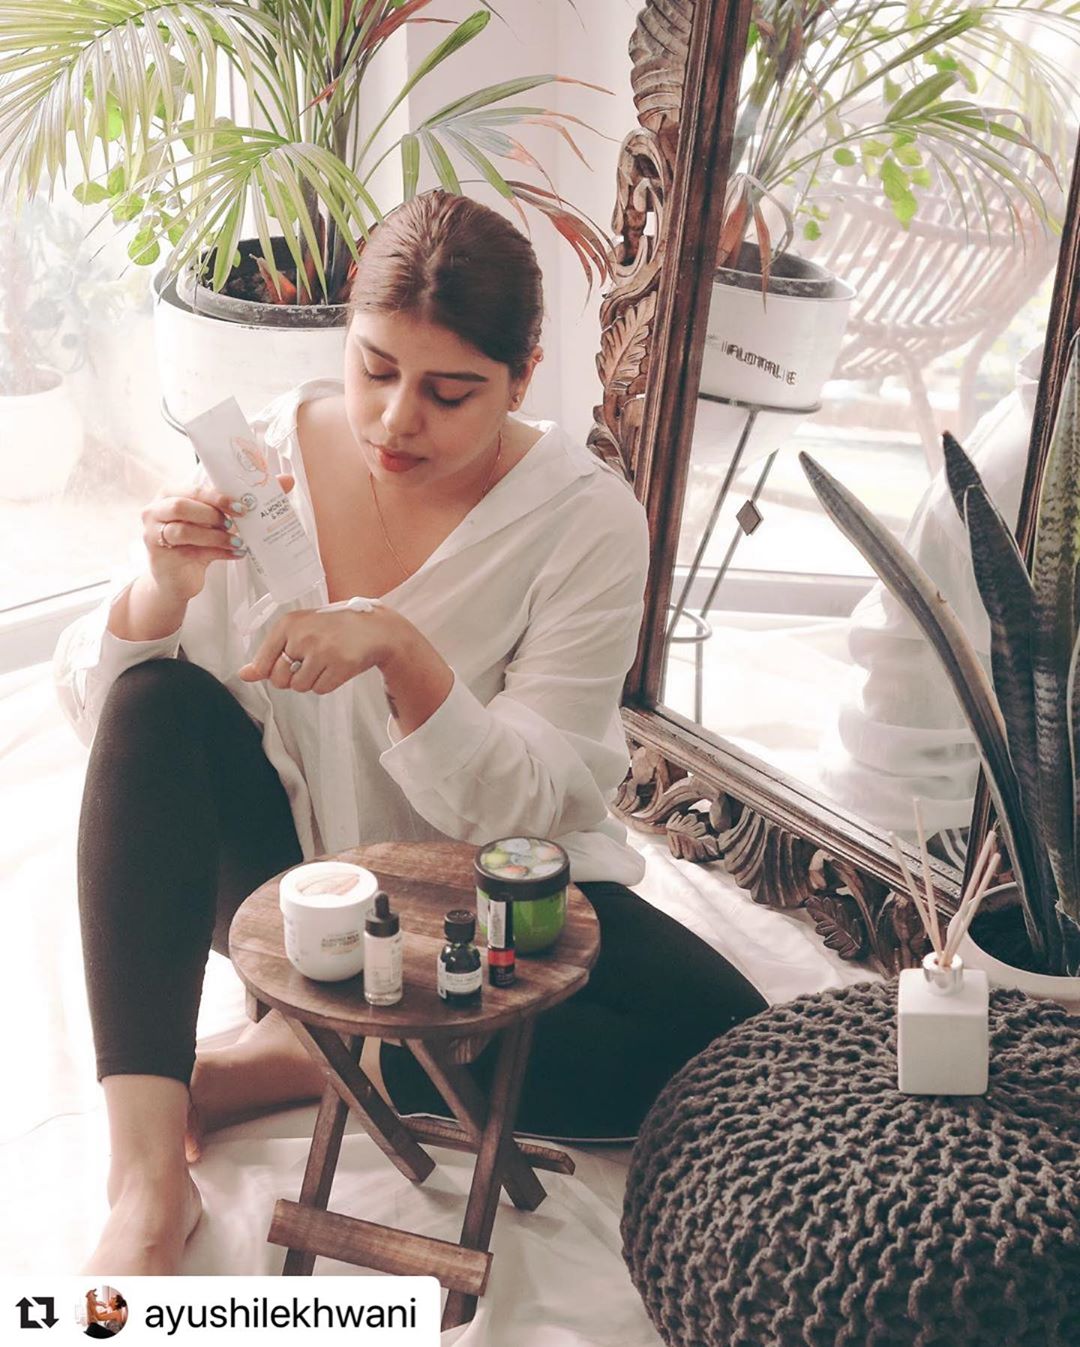 The Body Shop India - Want to stock up on your essentials but worried about stepping out? We are bringing the #SafeSpace experience to your doorstep with our home delivery service. @ayushilekhwani cal...